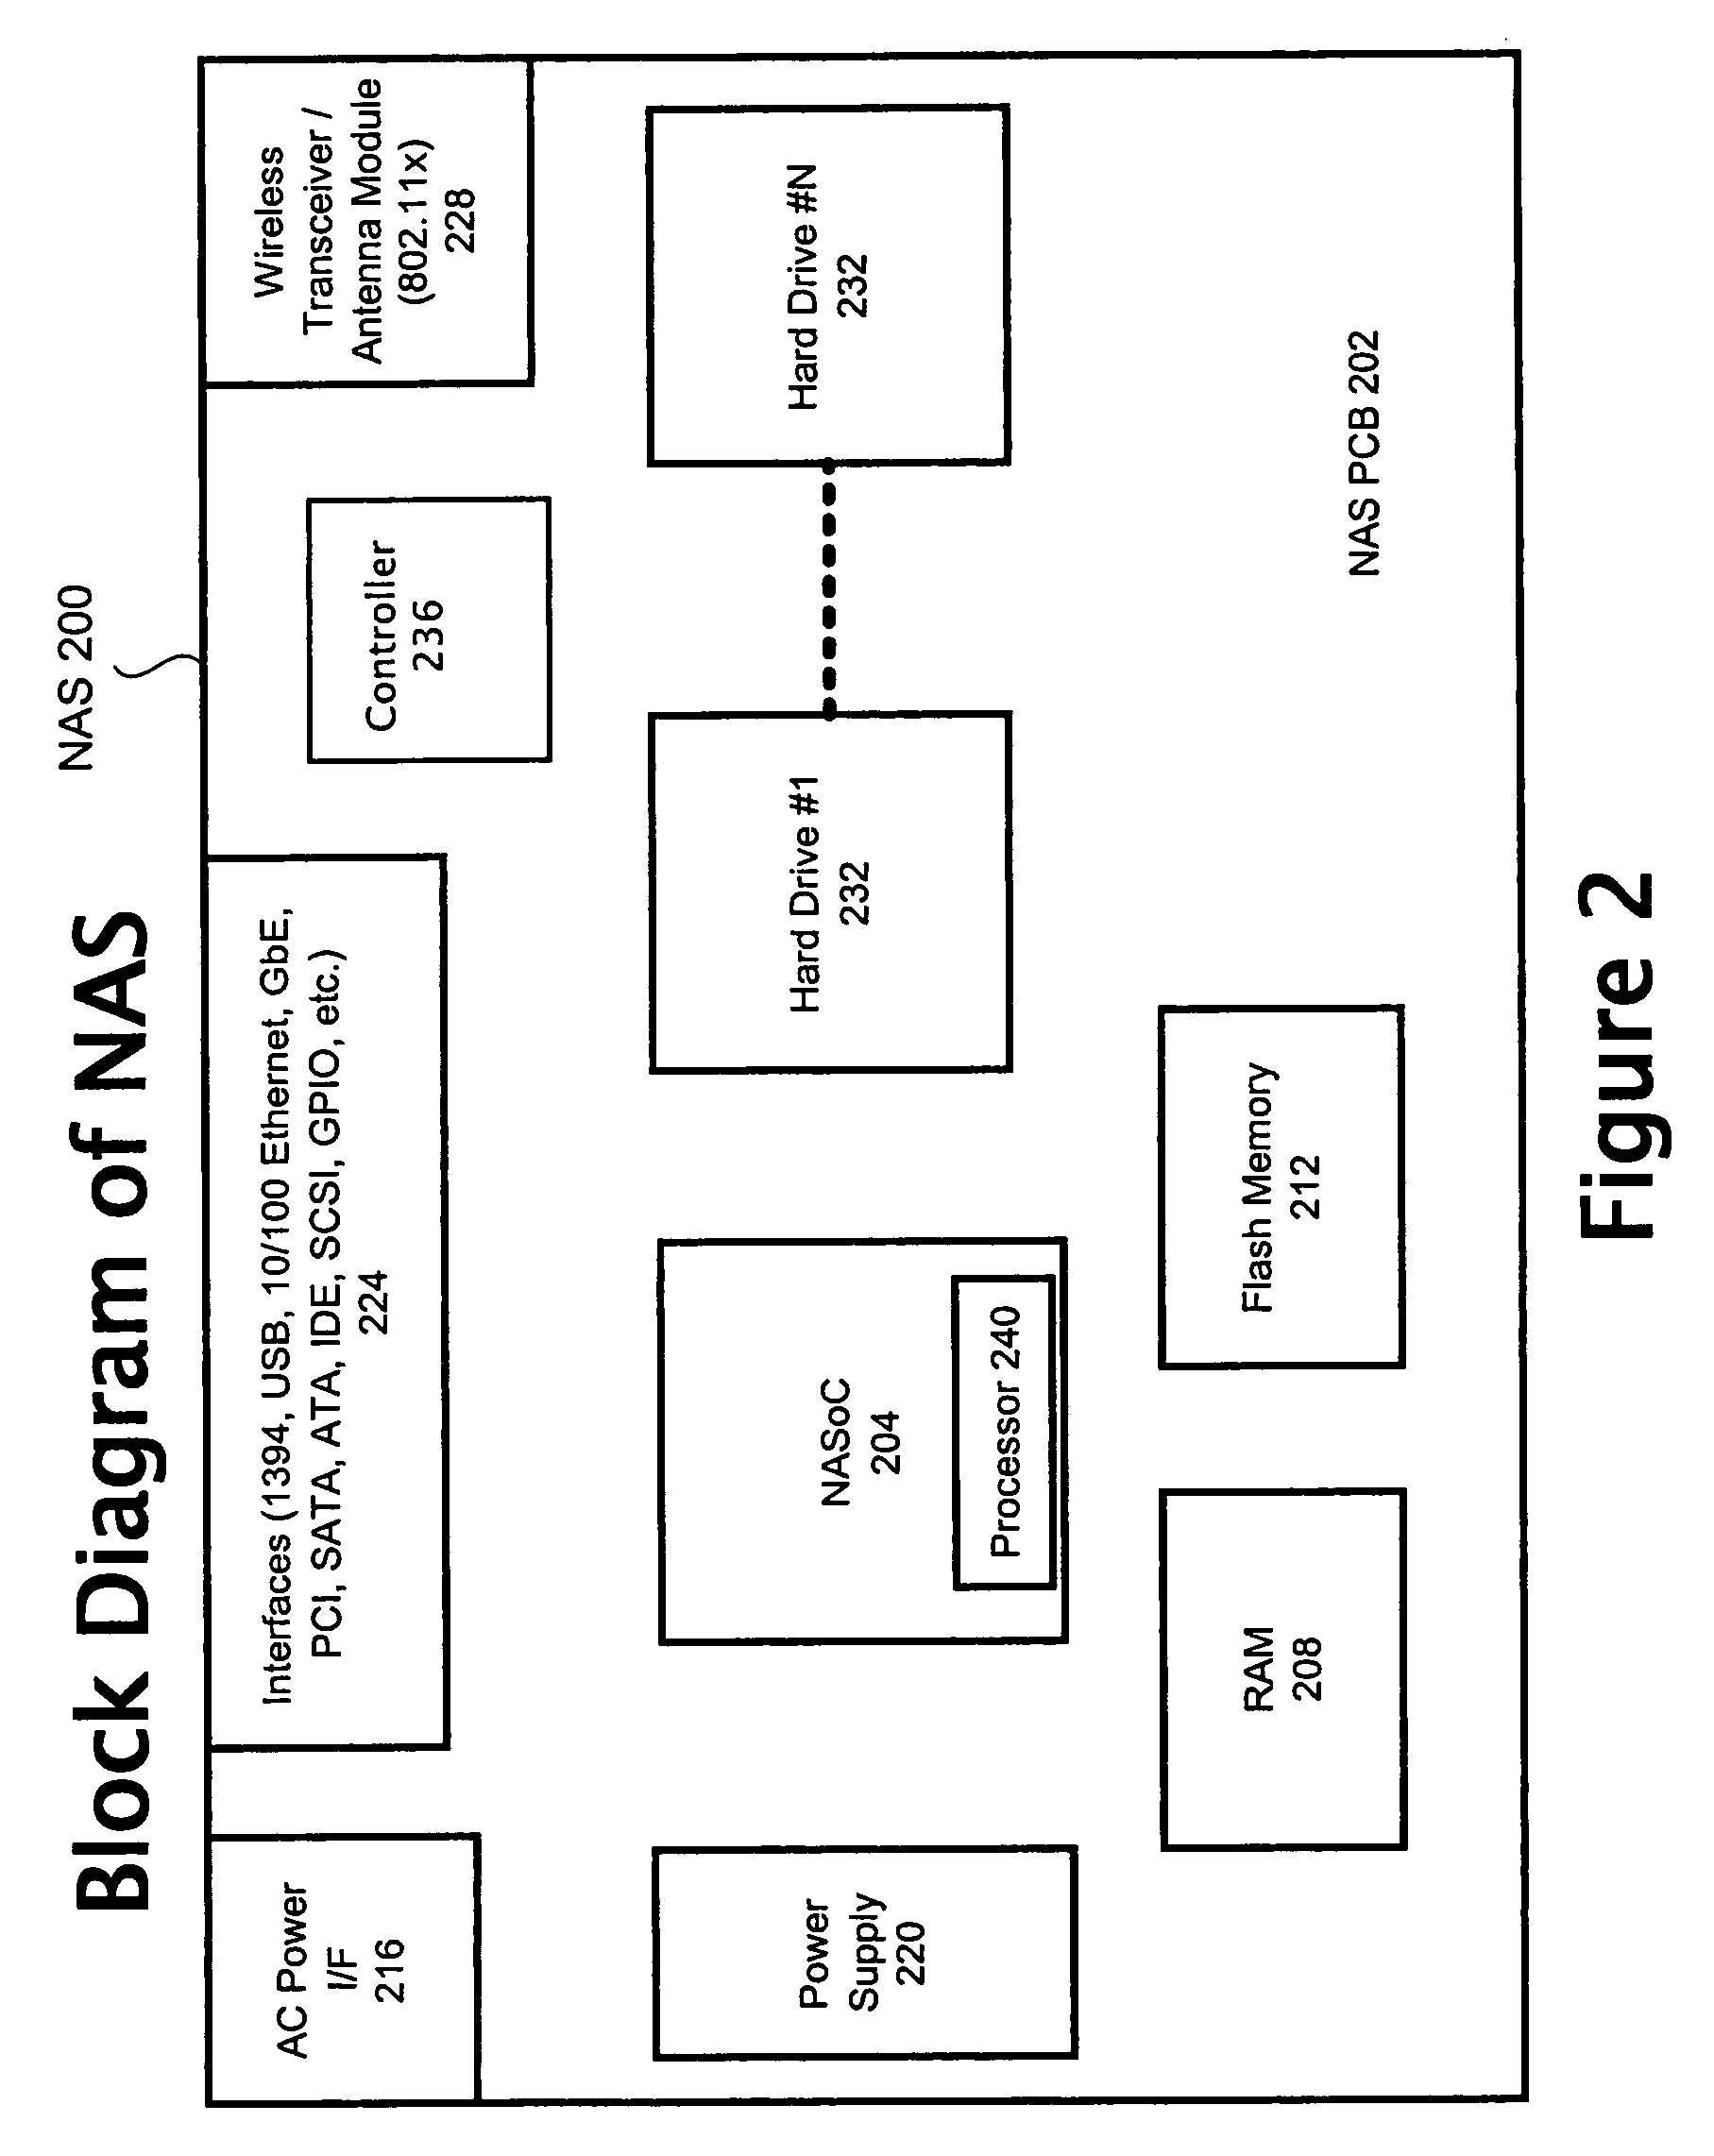 Method and system of data storage capacity allocation and management using one or more data storage drives